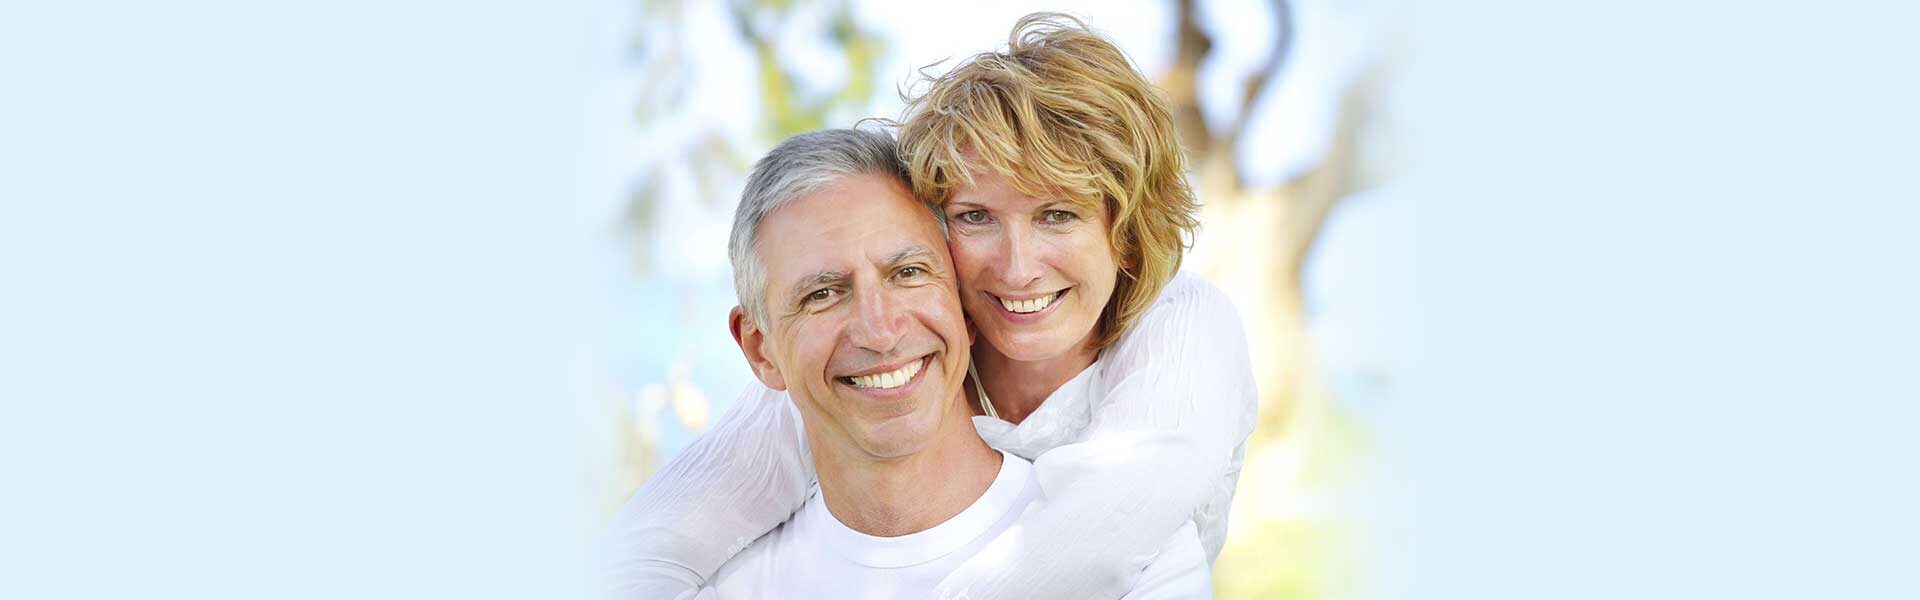 Single Dental Implants in Concord, NH